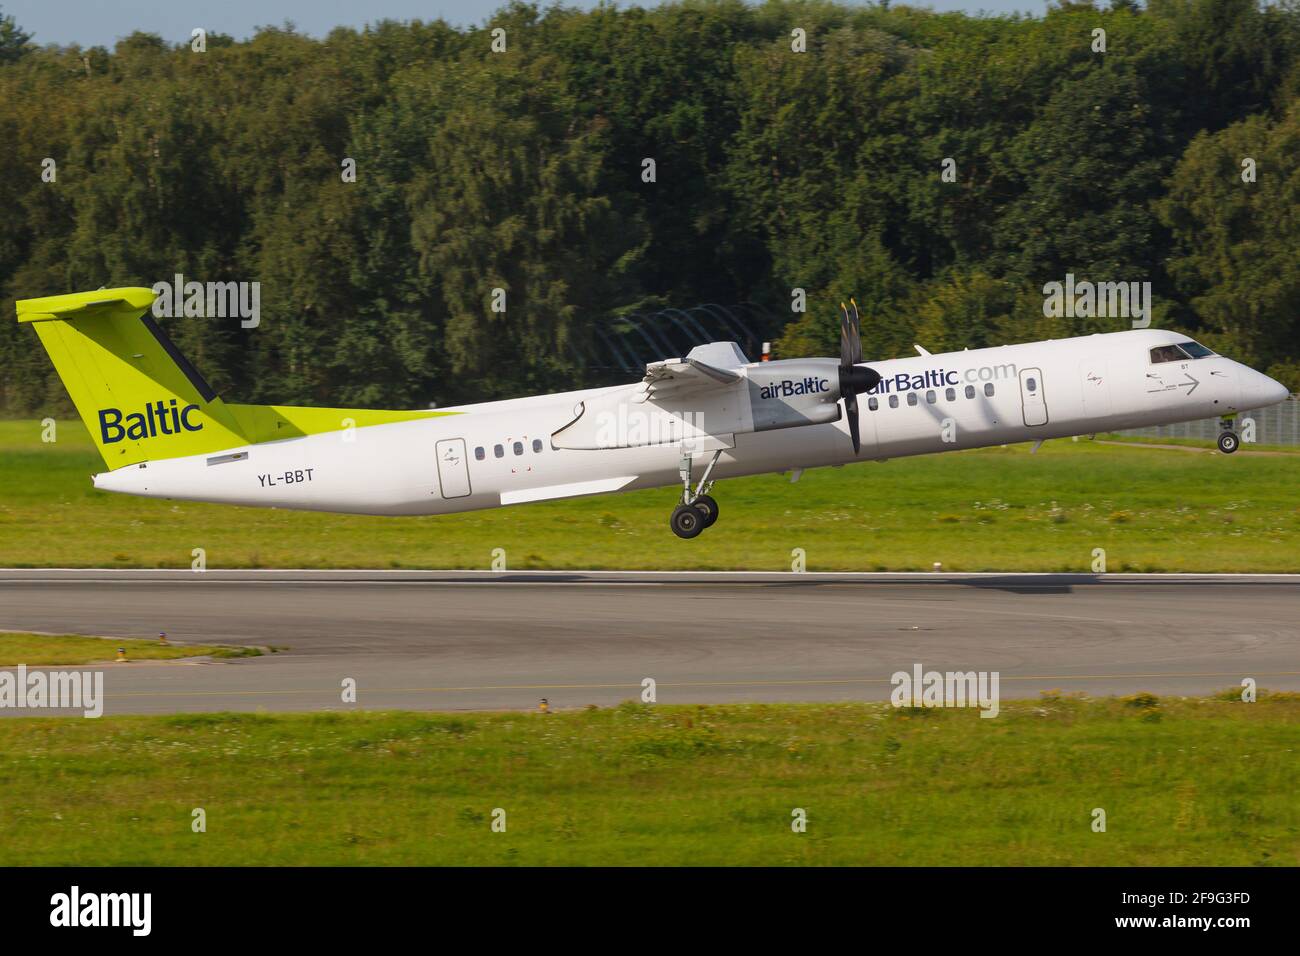 Hamburg, Germany - 03. September 2015: AirBaltic Bombardier Dash-8-Q400 at Hamburg airport (HAM) in Germany. Bombardier is an aircraft manufacturer ba Stock Photo